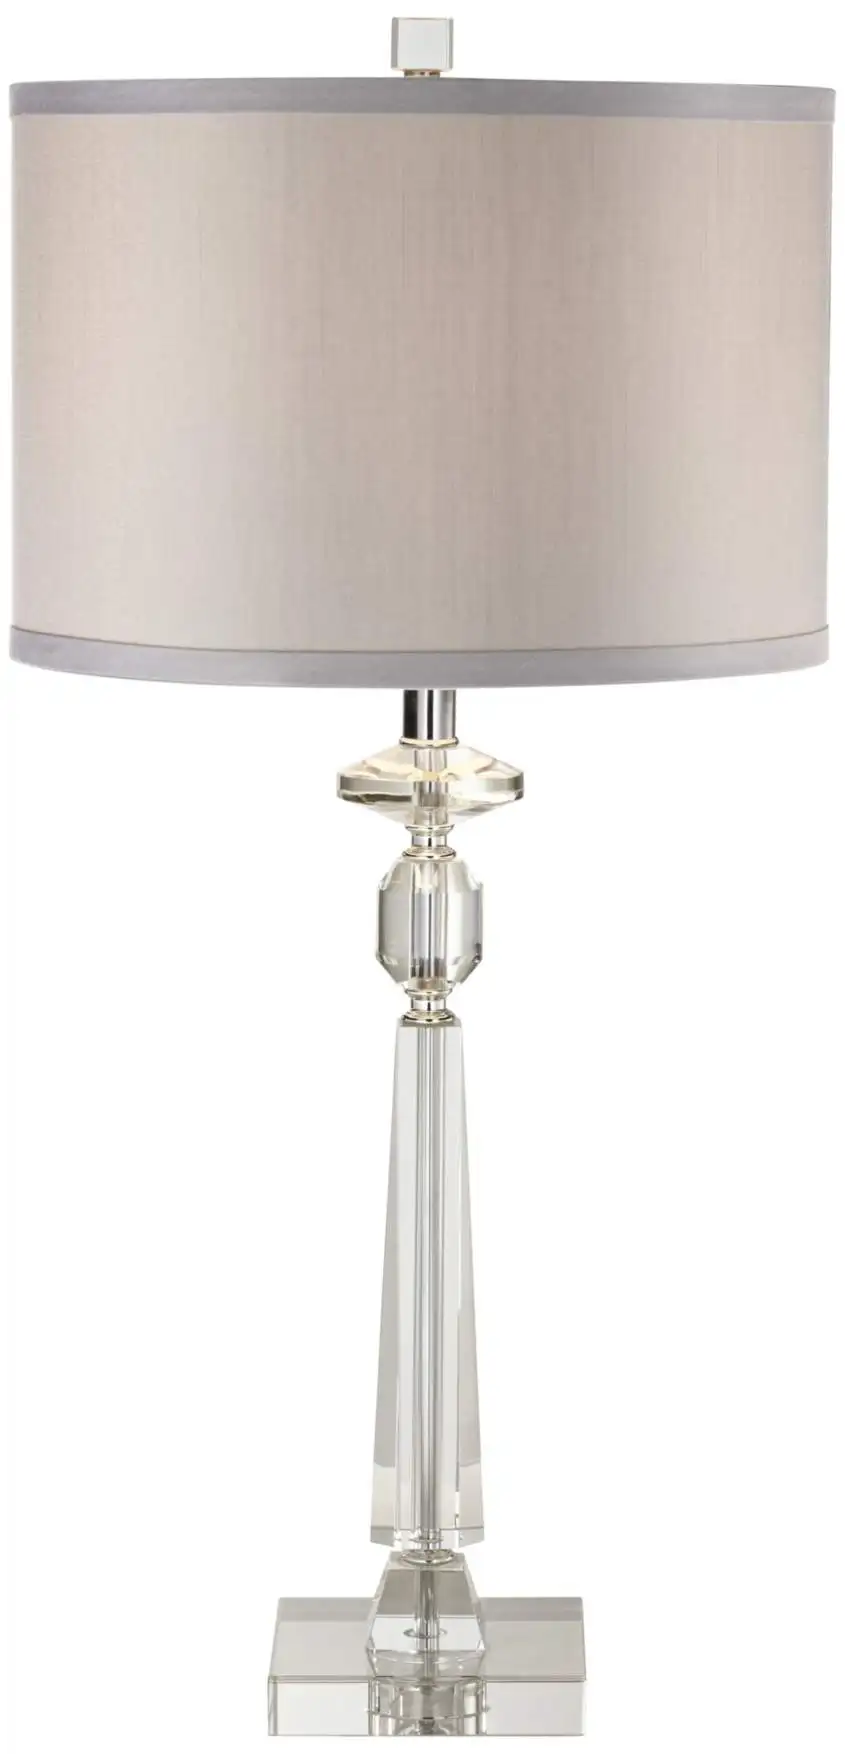 1015-11 tapers upward toward small geometric shapes column-style base sits Modern Crystal Table Lamp